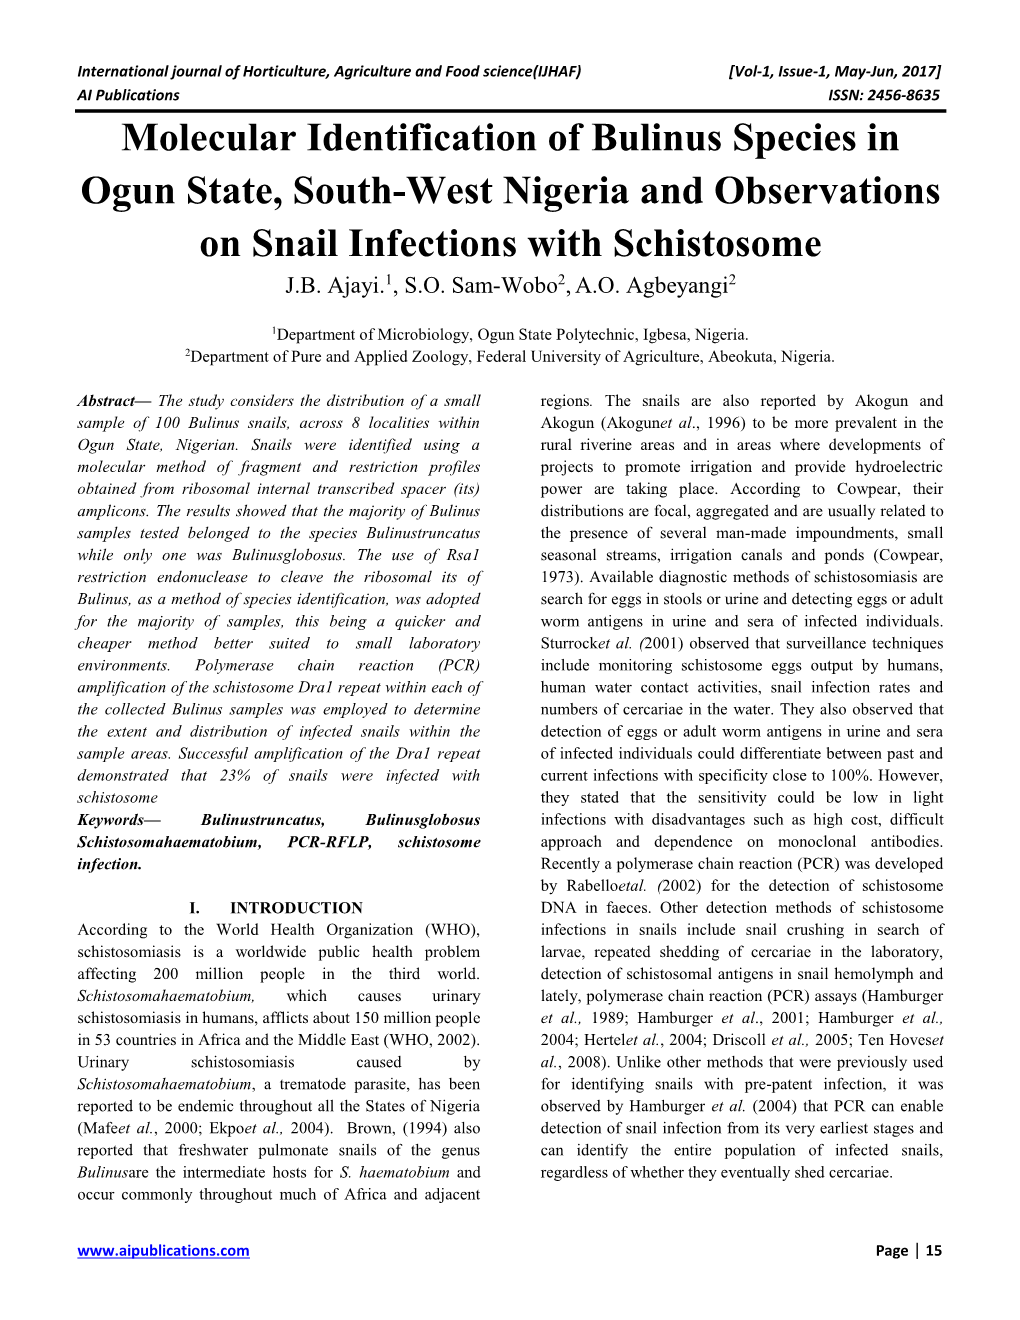 Molecular Identification of Bulinus Species in Ogun State, South-West Nigeria and Observations on Snail Infections with Schistosome J.B